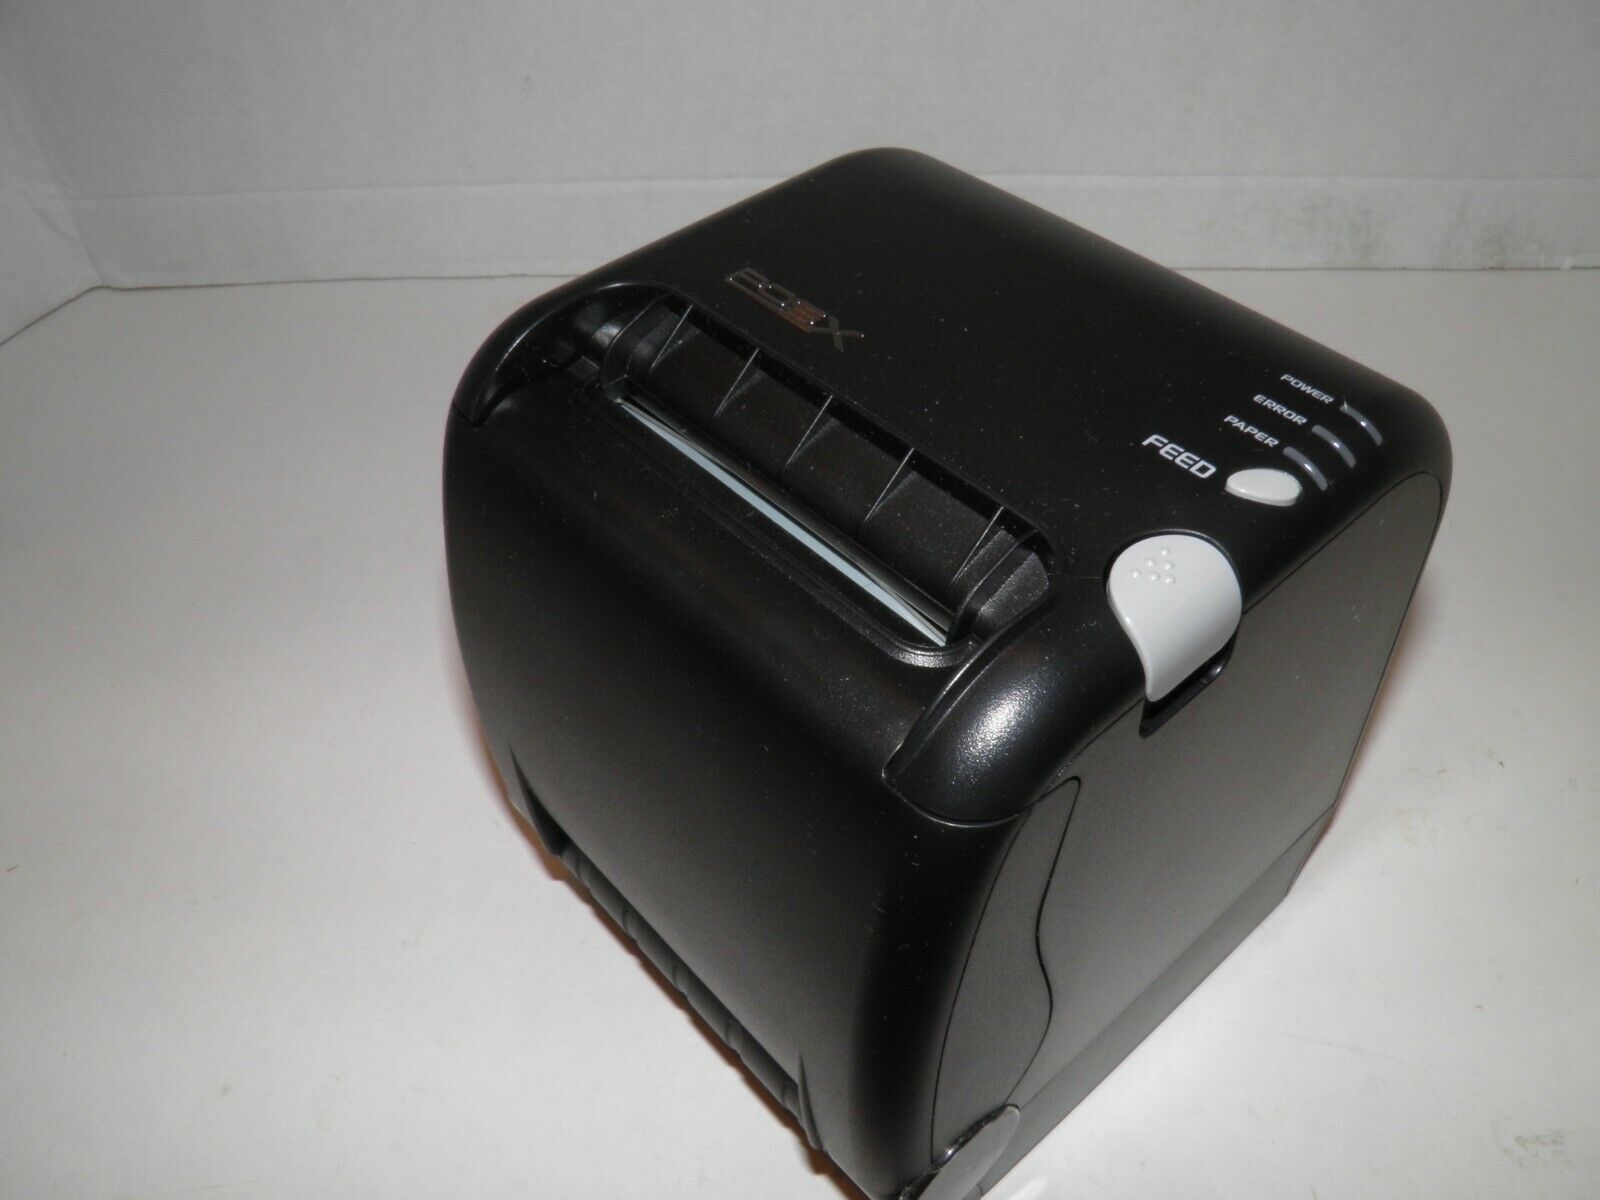 POS-X ION PT2 Thermal POS Receipt Printer USB or Serial with Power Supply - $138.31